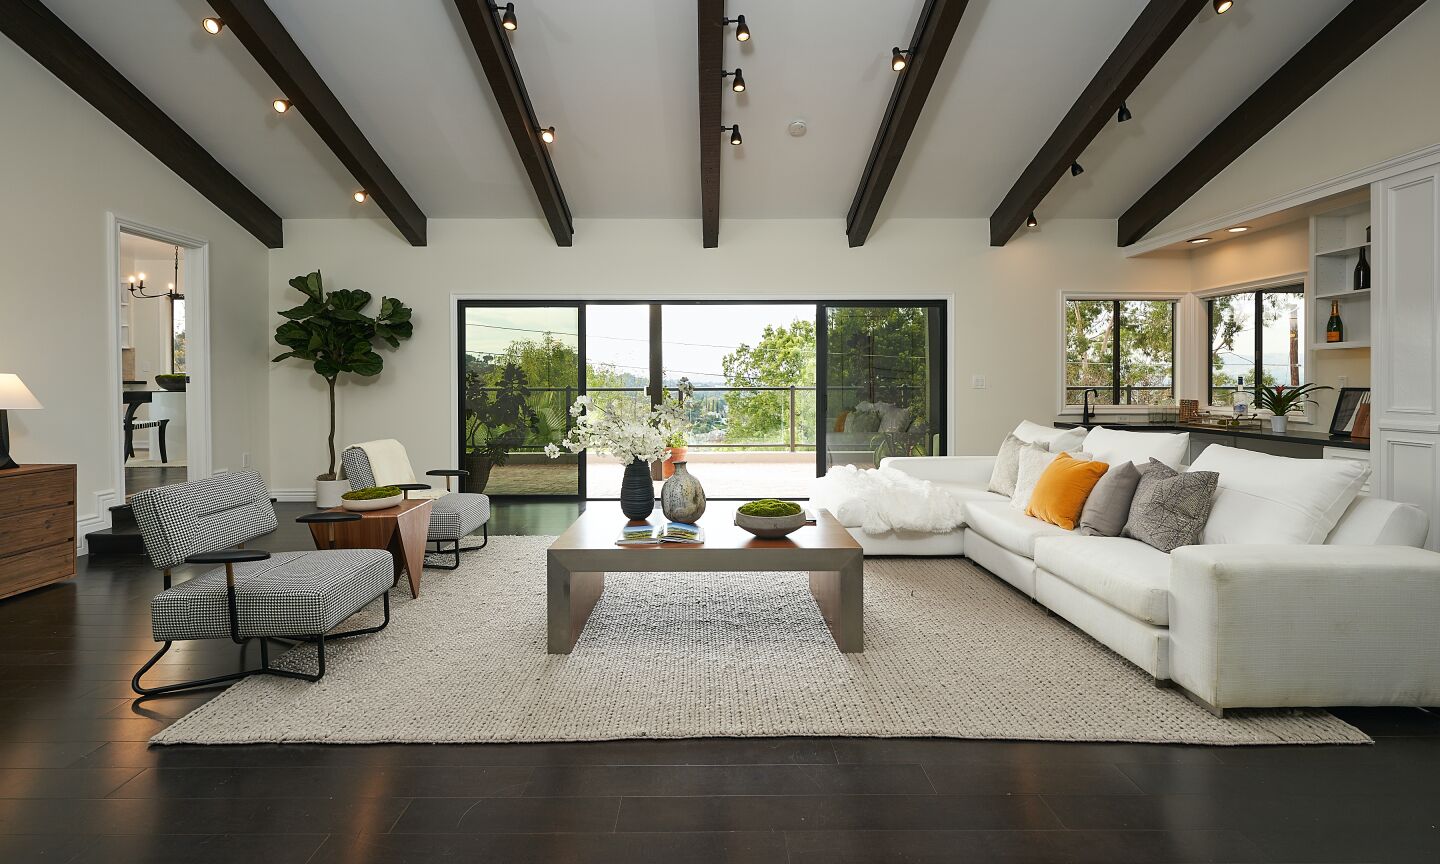 The living room is spacious with dark wood ceiling beams and sliding glass doors to the back.